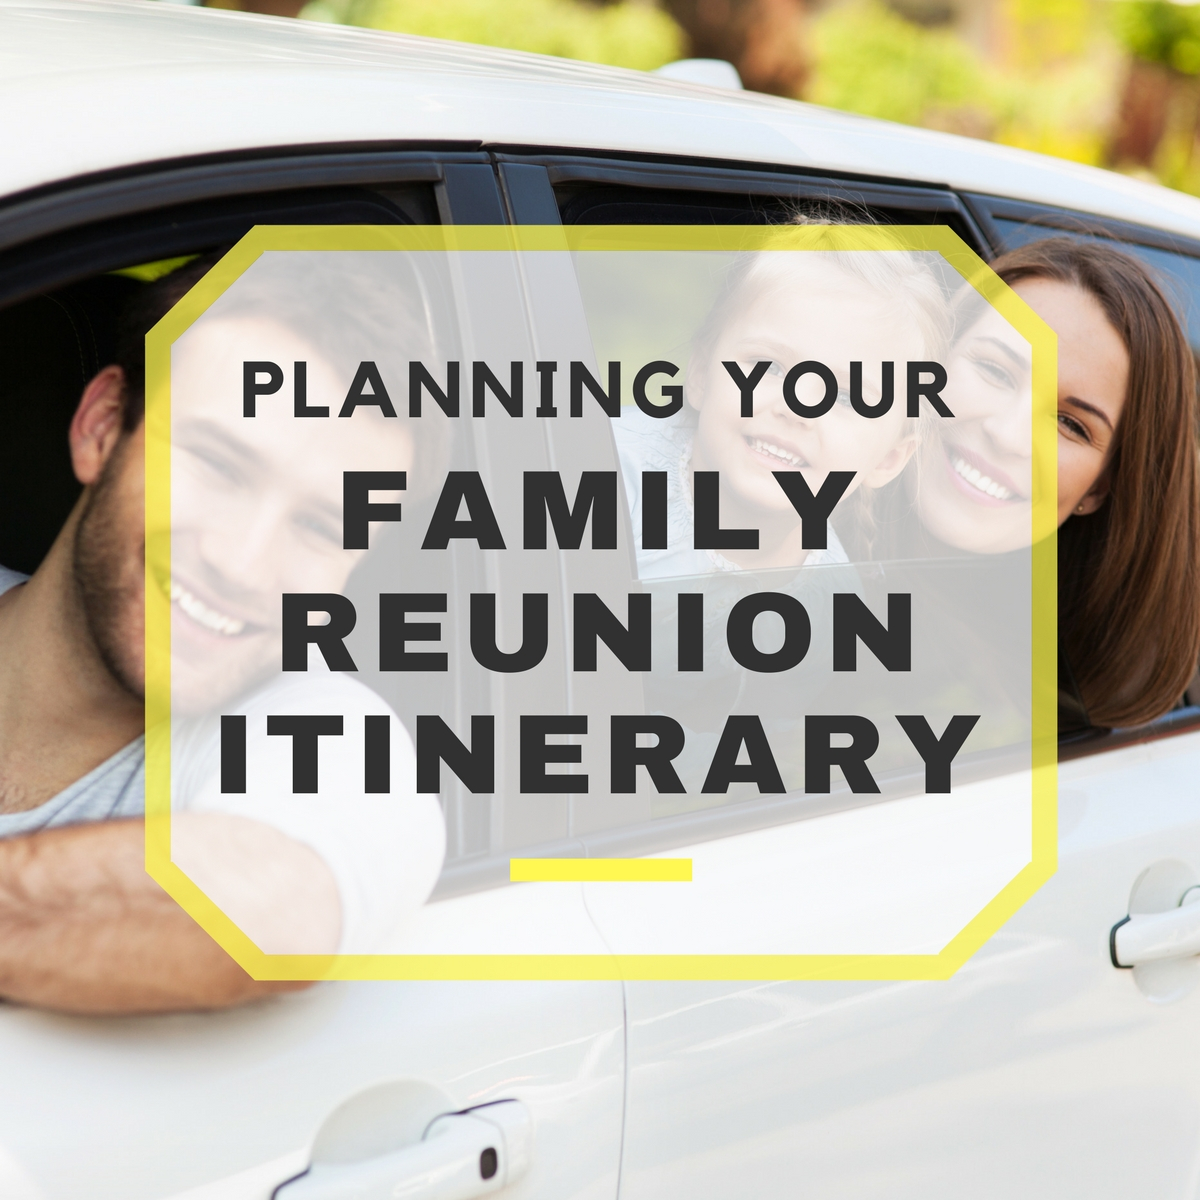 Planning Your Family Reunion Itinerary Pertaining To Family Reunion Itinerary Template With Regard To Family Reunion Itinerary Template